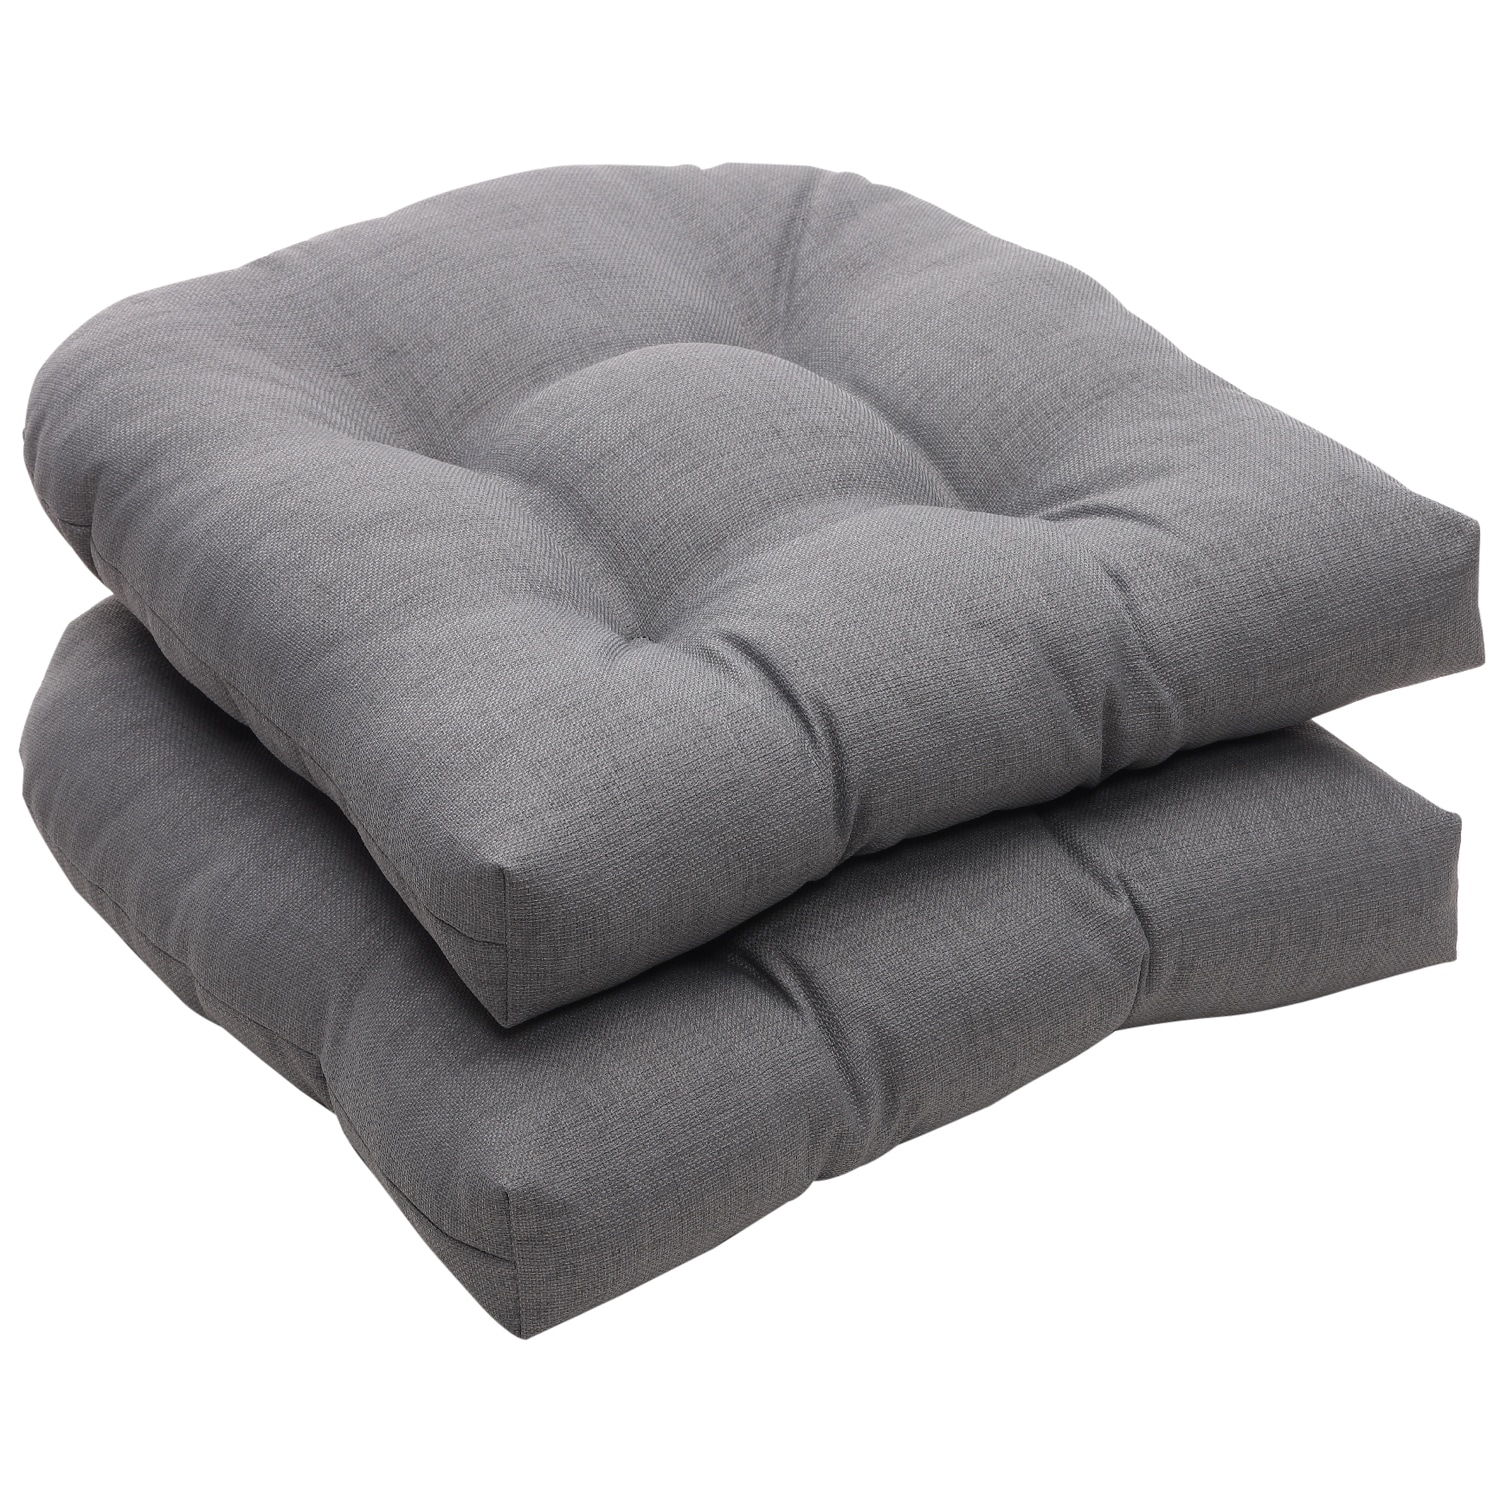 Outdoor Gray Textured Solid Wicker Seat Cushions (Set of 2) - Free